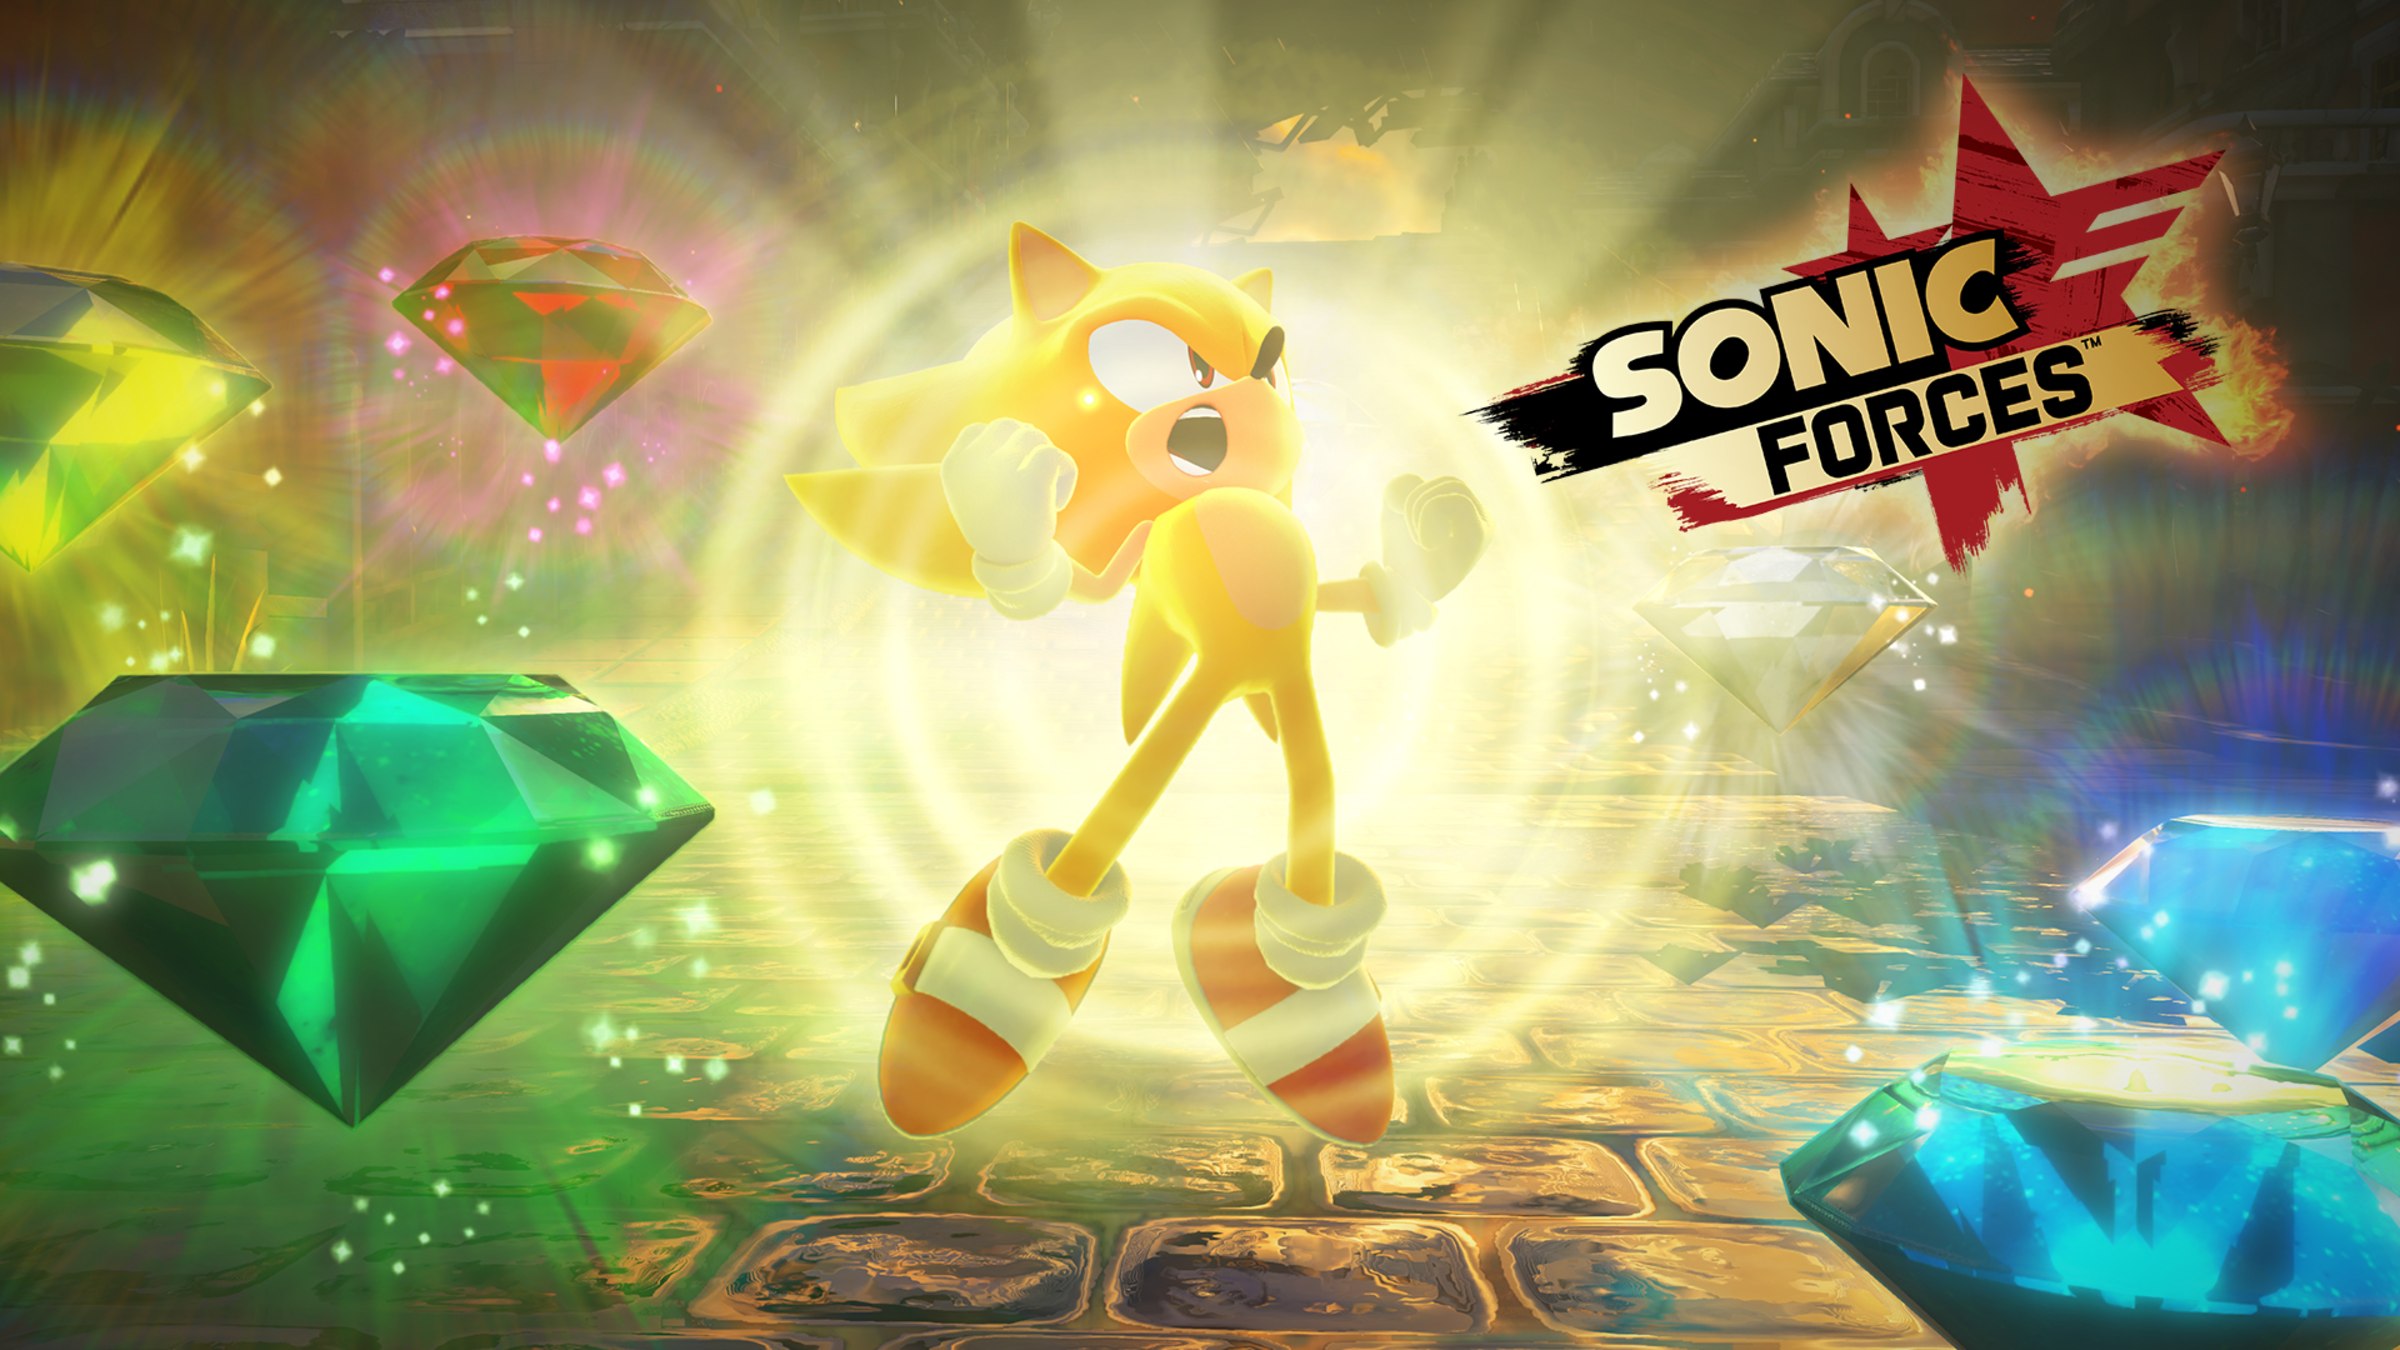 SUPER SONIC for Nintendo Switch - Nintendo Official Site